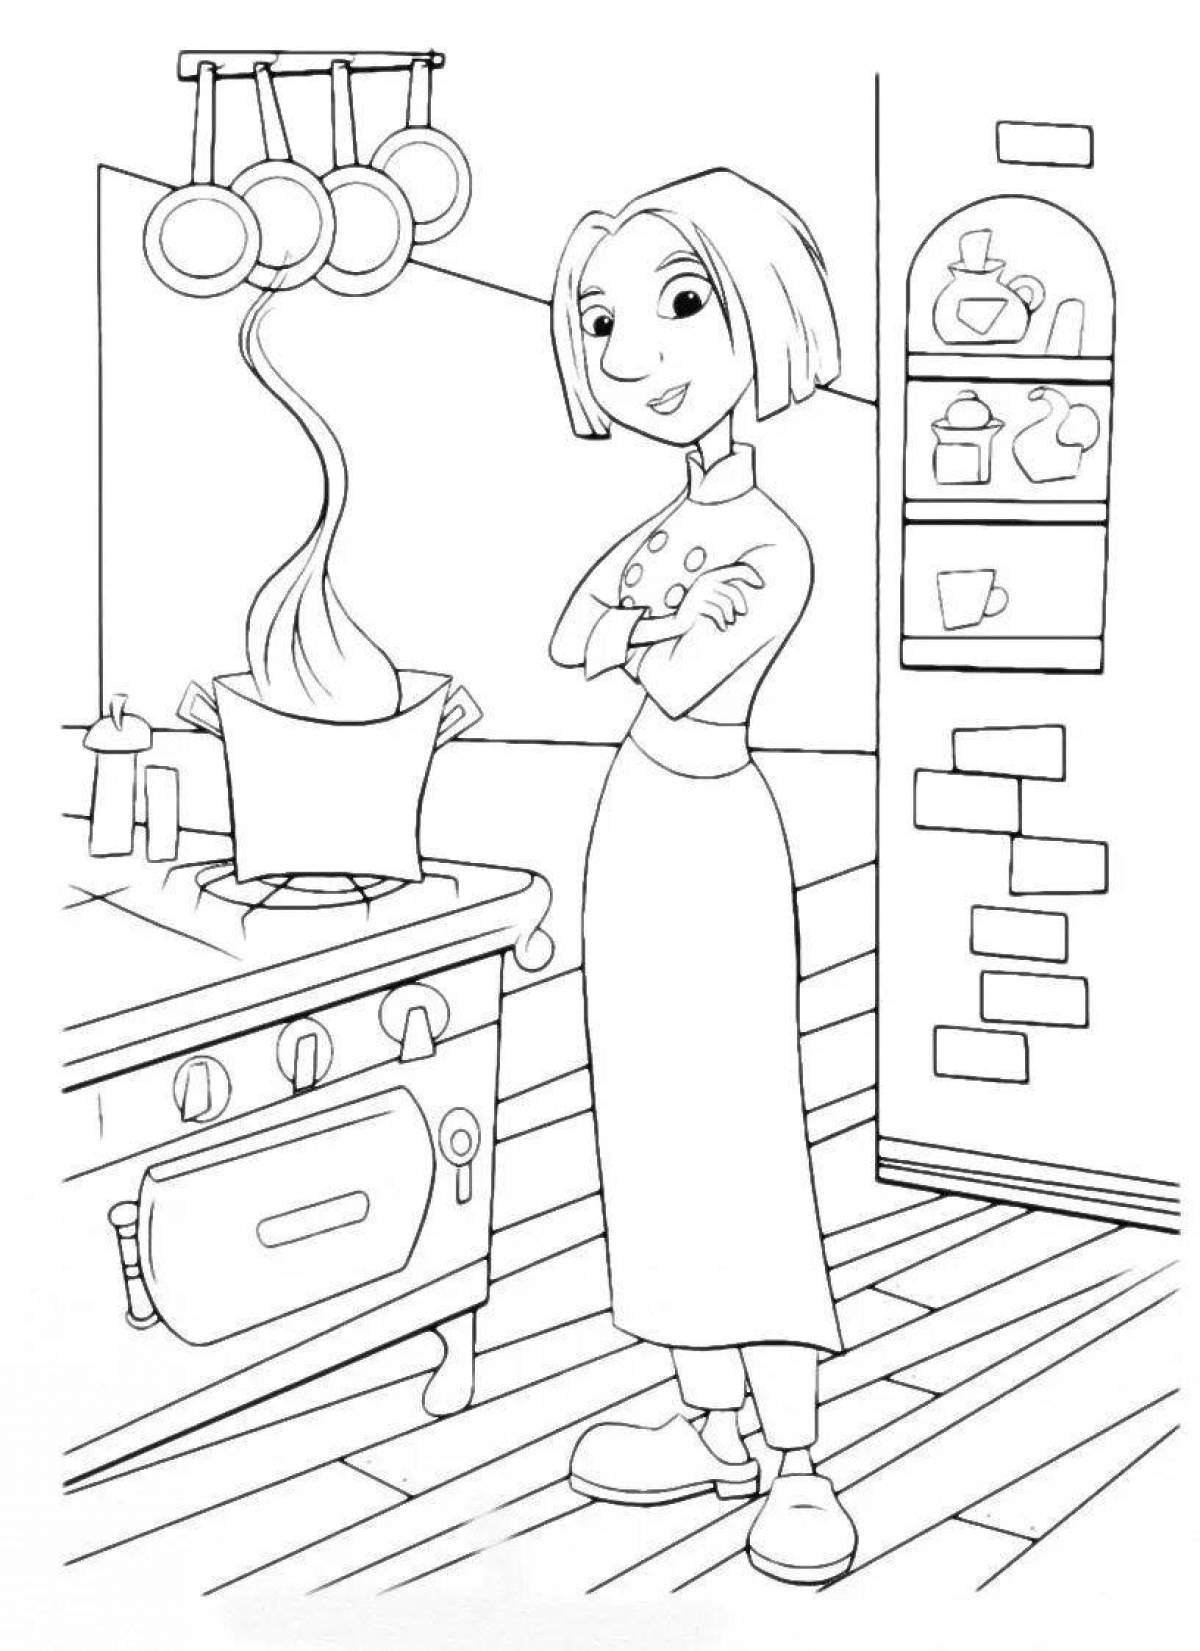 Colorful housewife coloring book